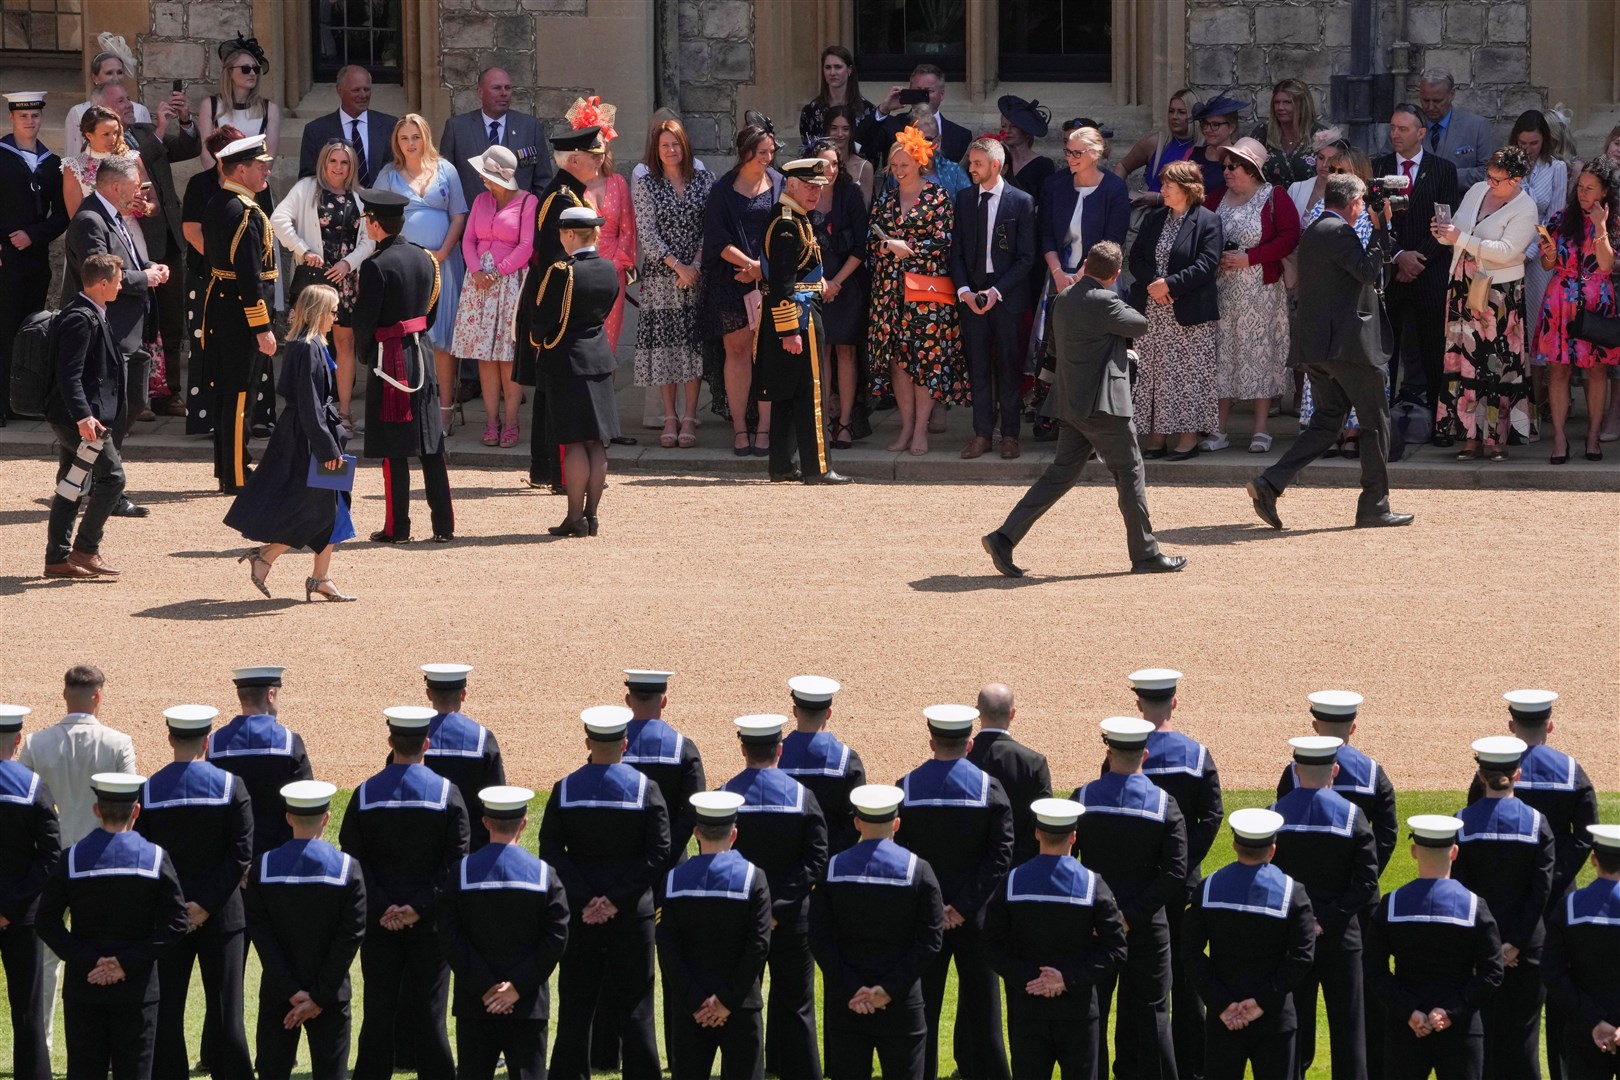 The King talks to relatives after presenting the Royal Victorian Order to members of the Royal Navy for their part in the late Queen’s funeral procession (Maja Smiejkowska/PA)